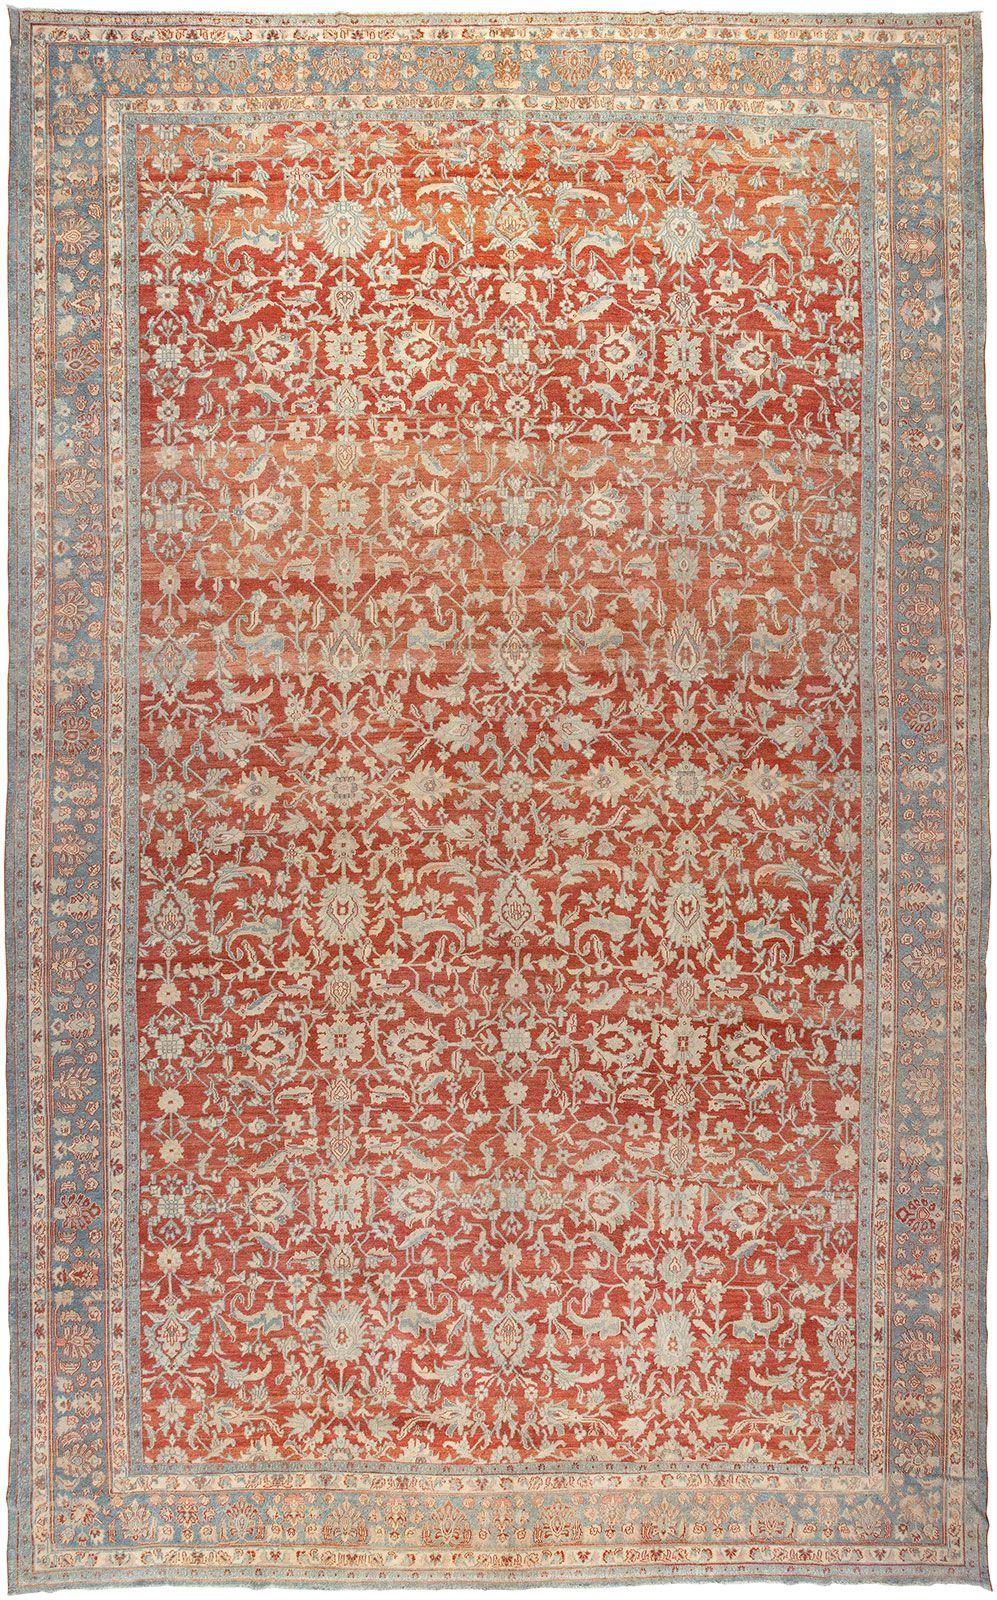 An early 20th century Persian Bibikabad oversize rug with an elegant allover design in beige, pink and gray on a soft red ground

Measures: 12'7